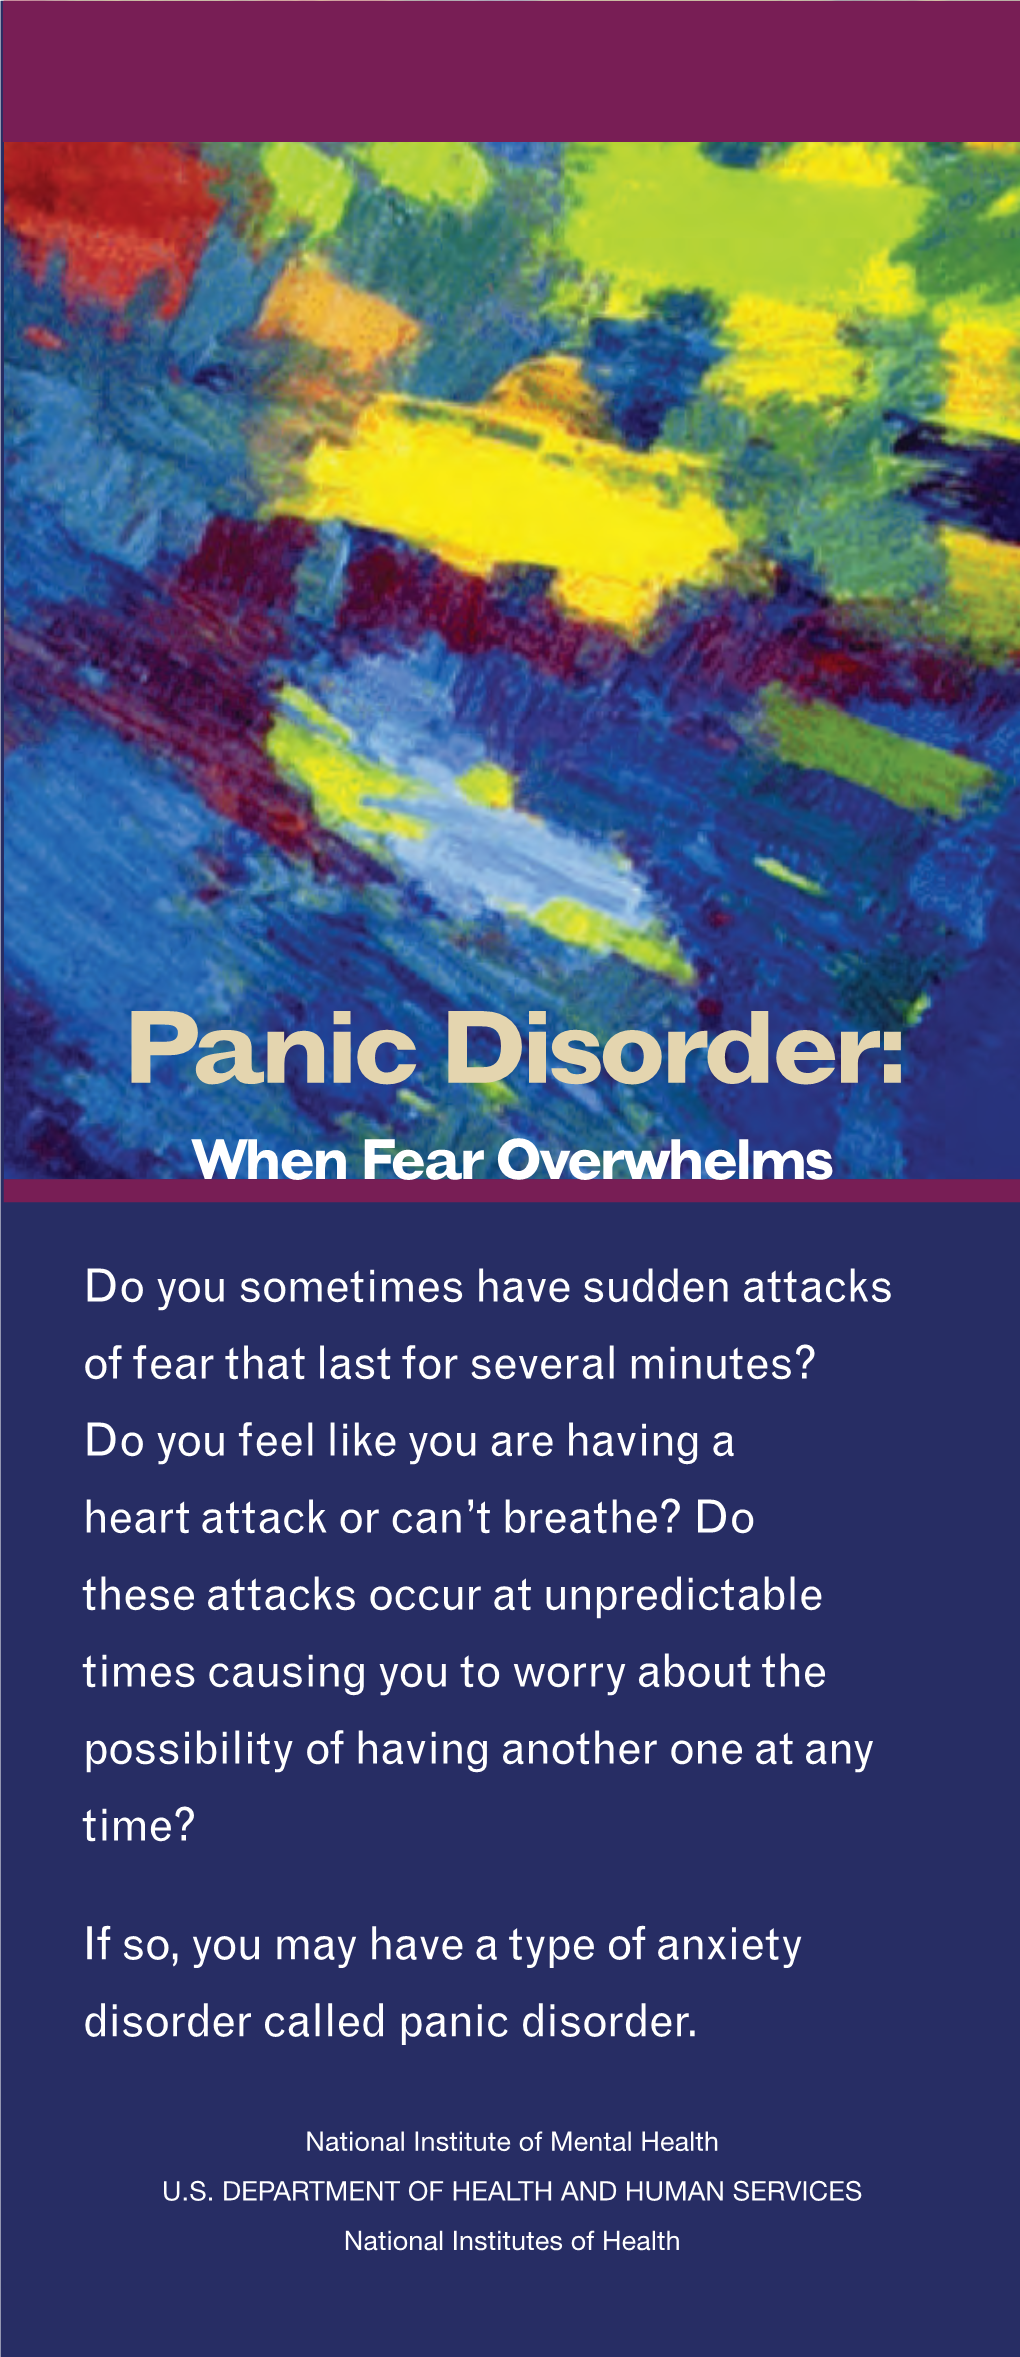 Panic Disorder: When Fear Overwhelms